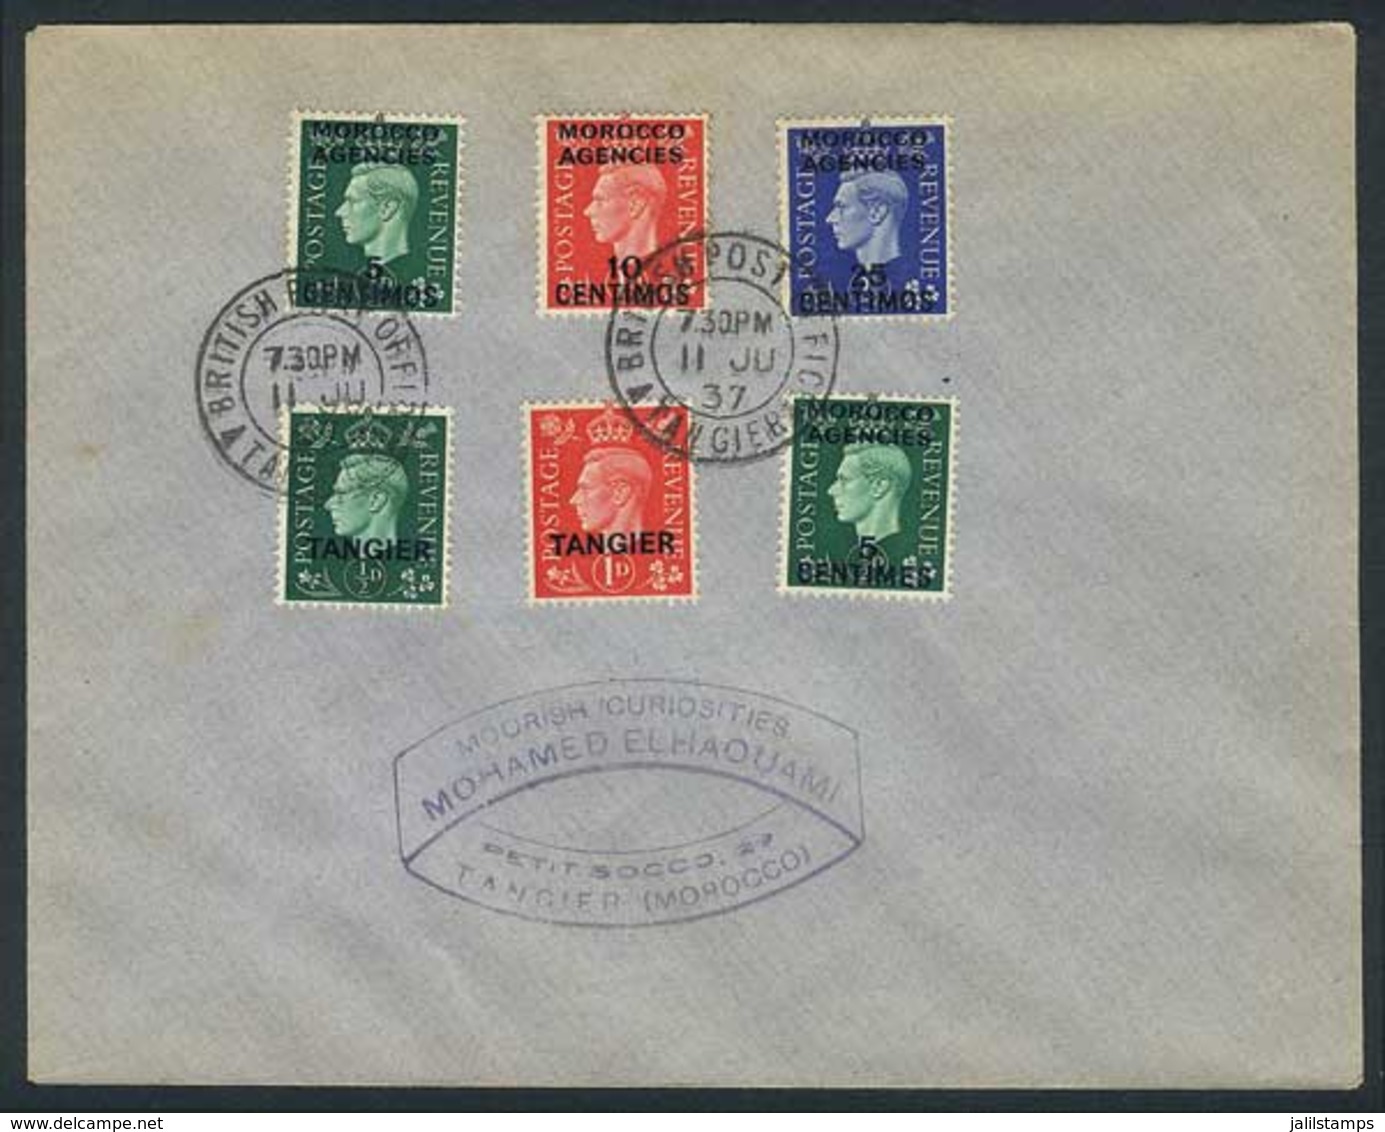 BRITISH MOROCCO: Cover Franked With 6 Overprinted Stamps, Postmarked "BRITISH POST OFFICE - TANGIER - 11/JU/1937", VF Qu - Morocco Agencies / Tangier (...-1958)